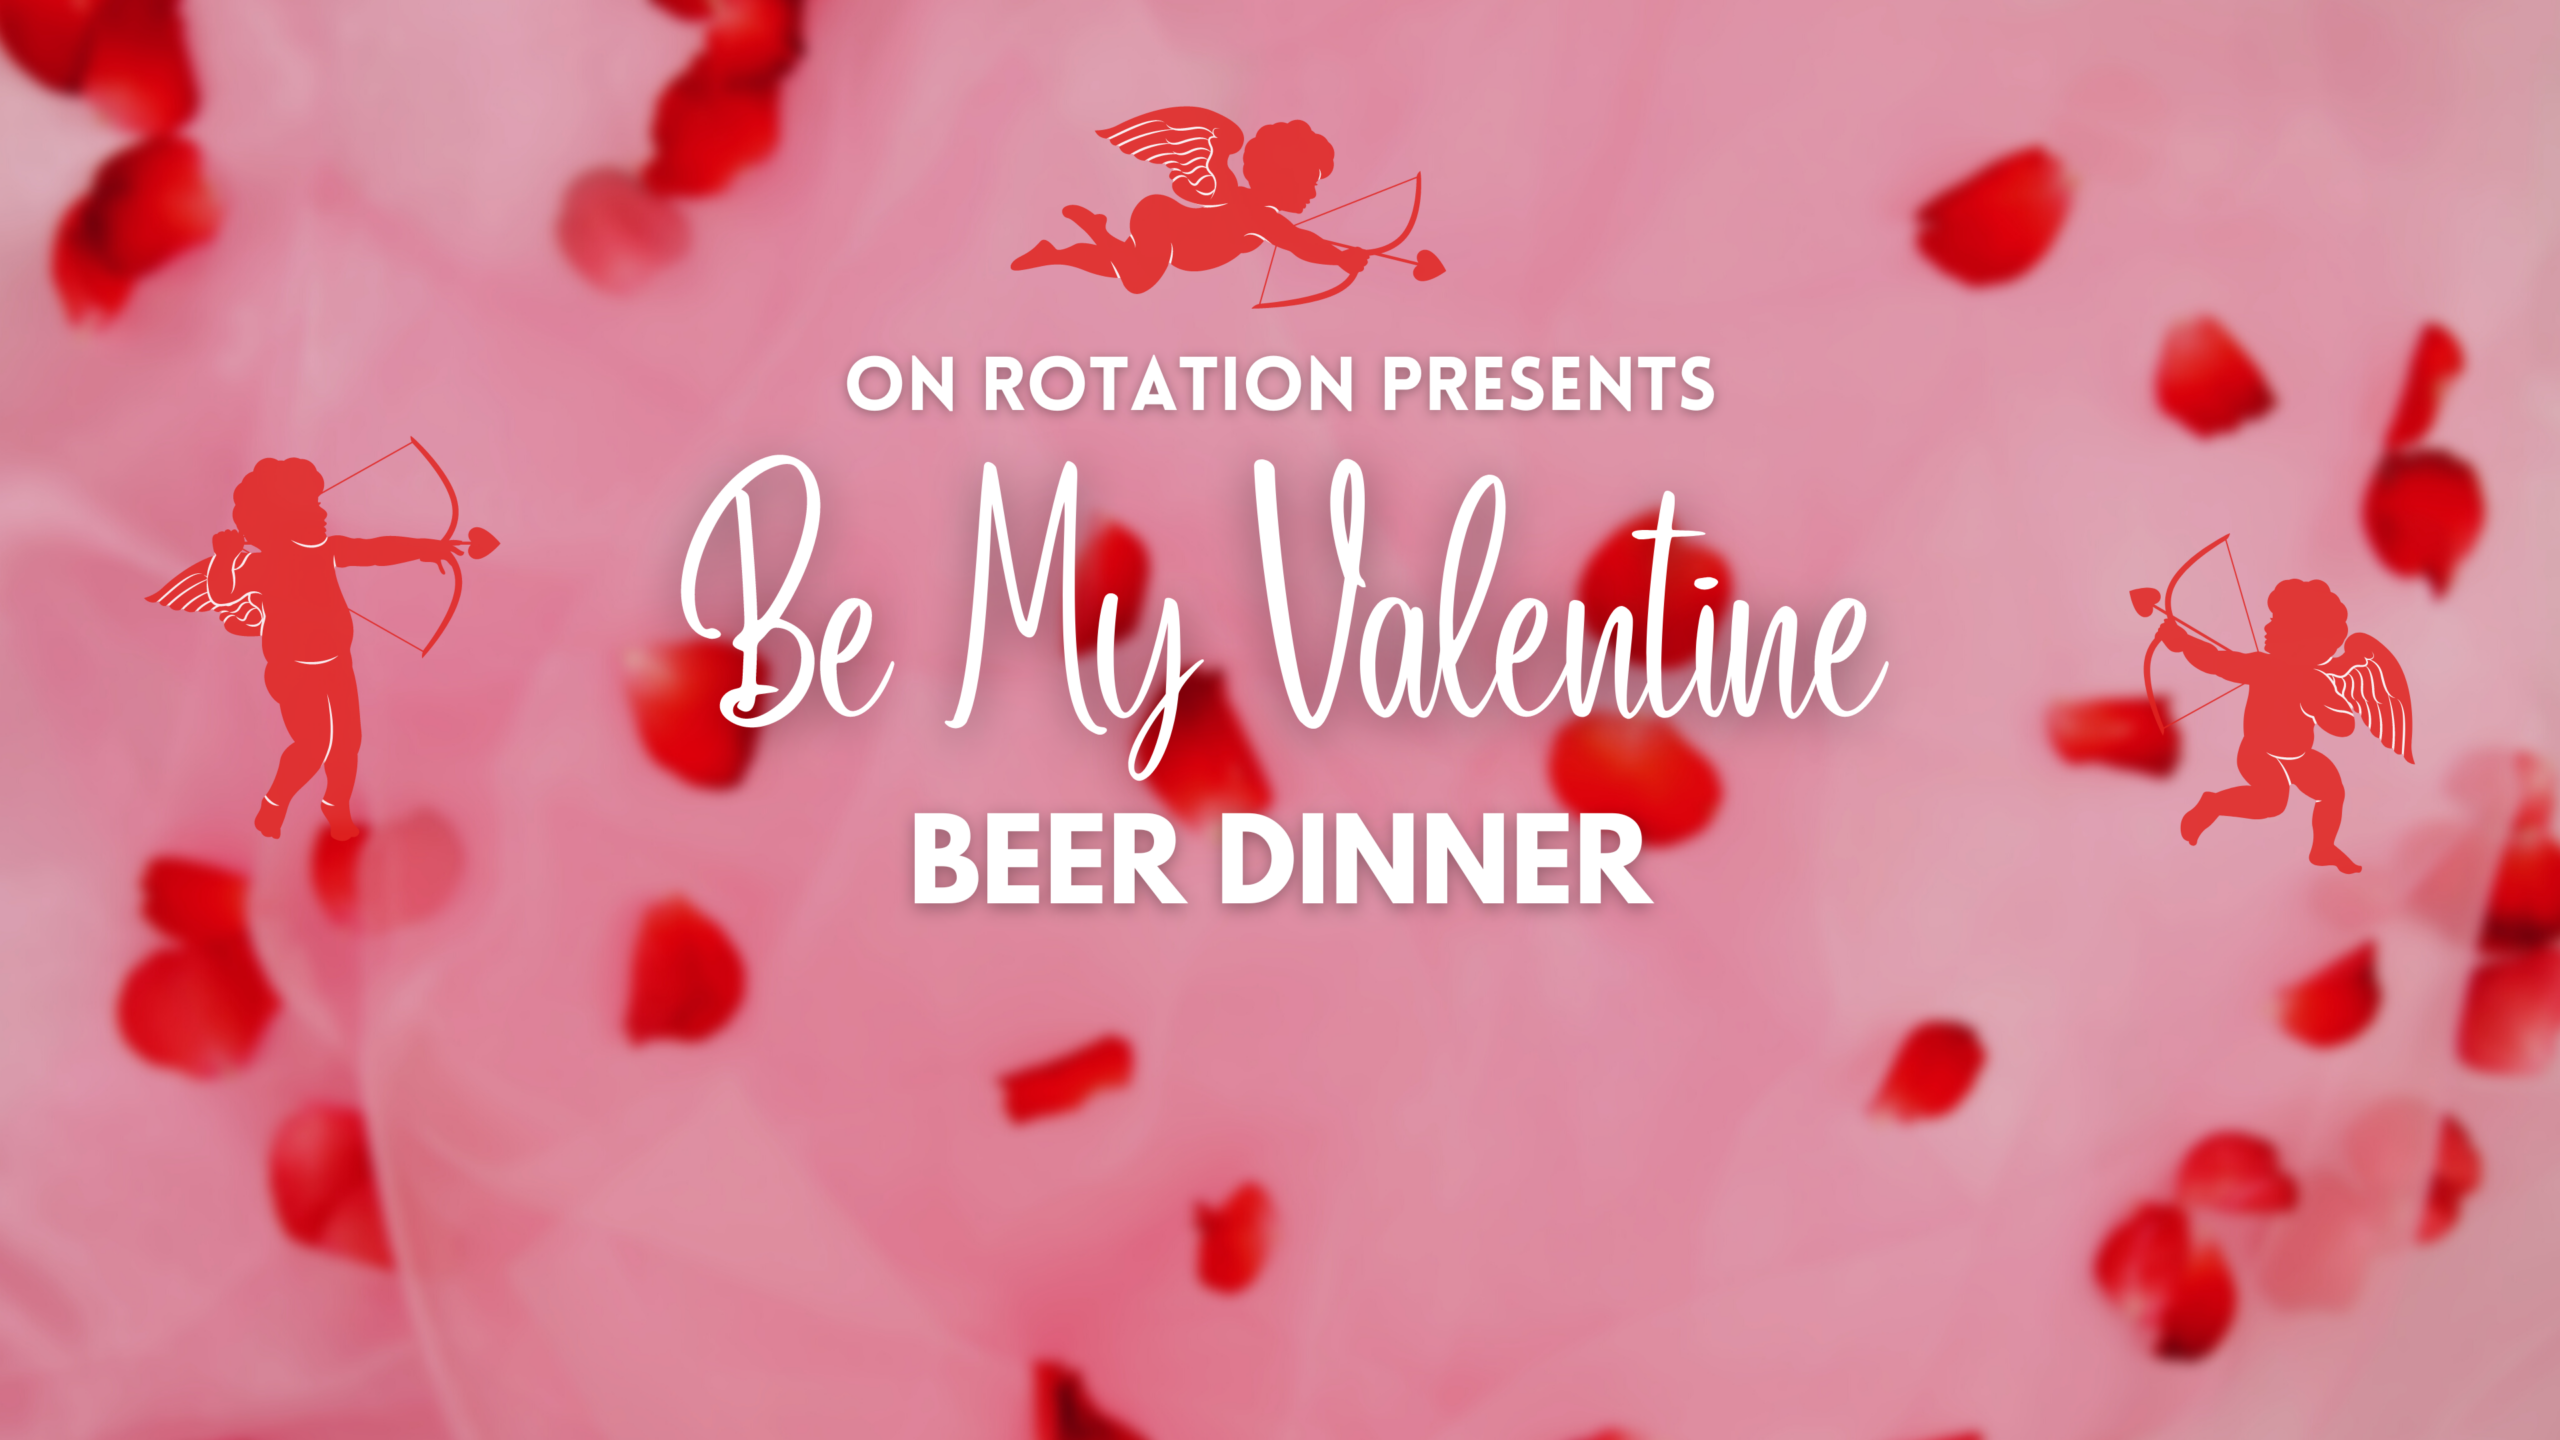 Be My Valentine Beer Dinner at On Rotation